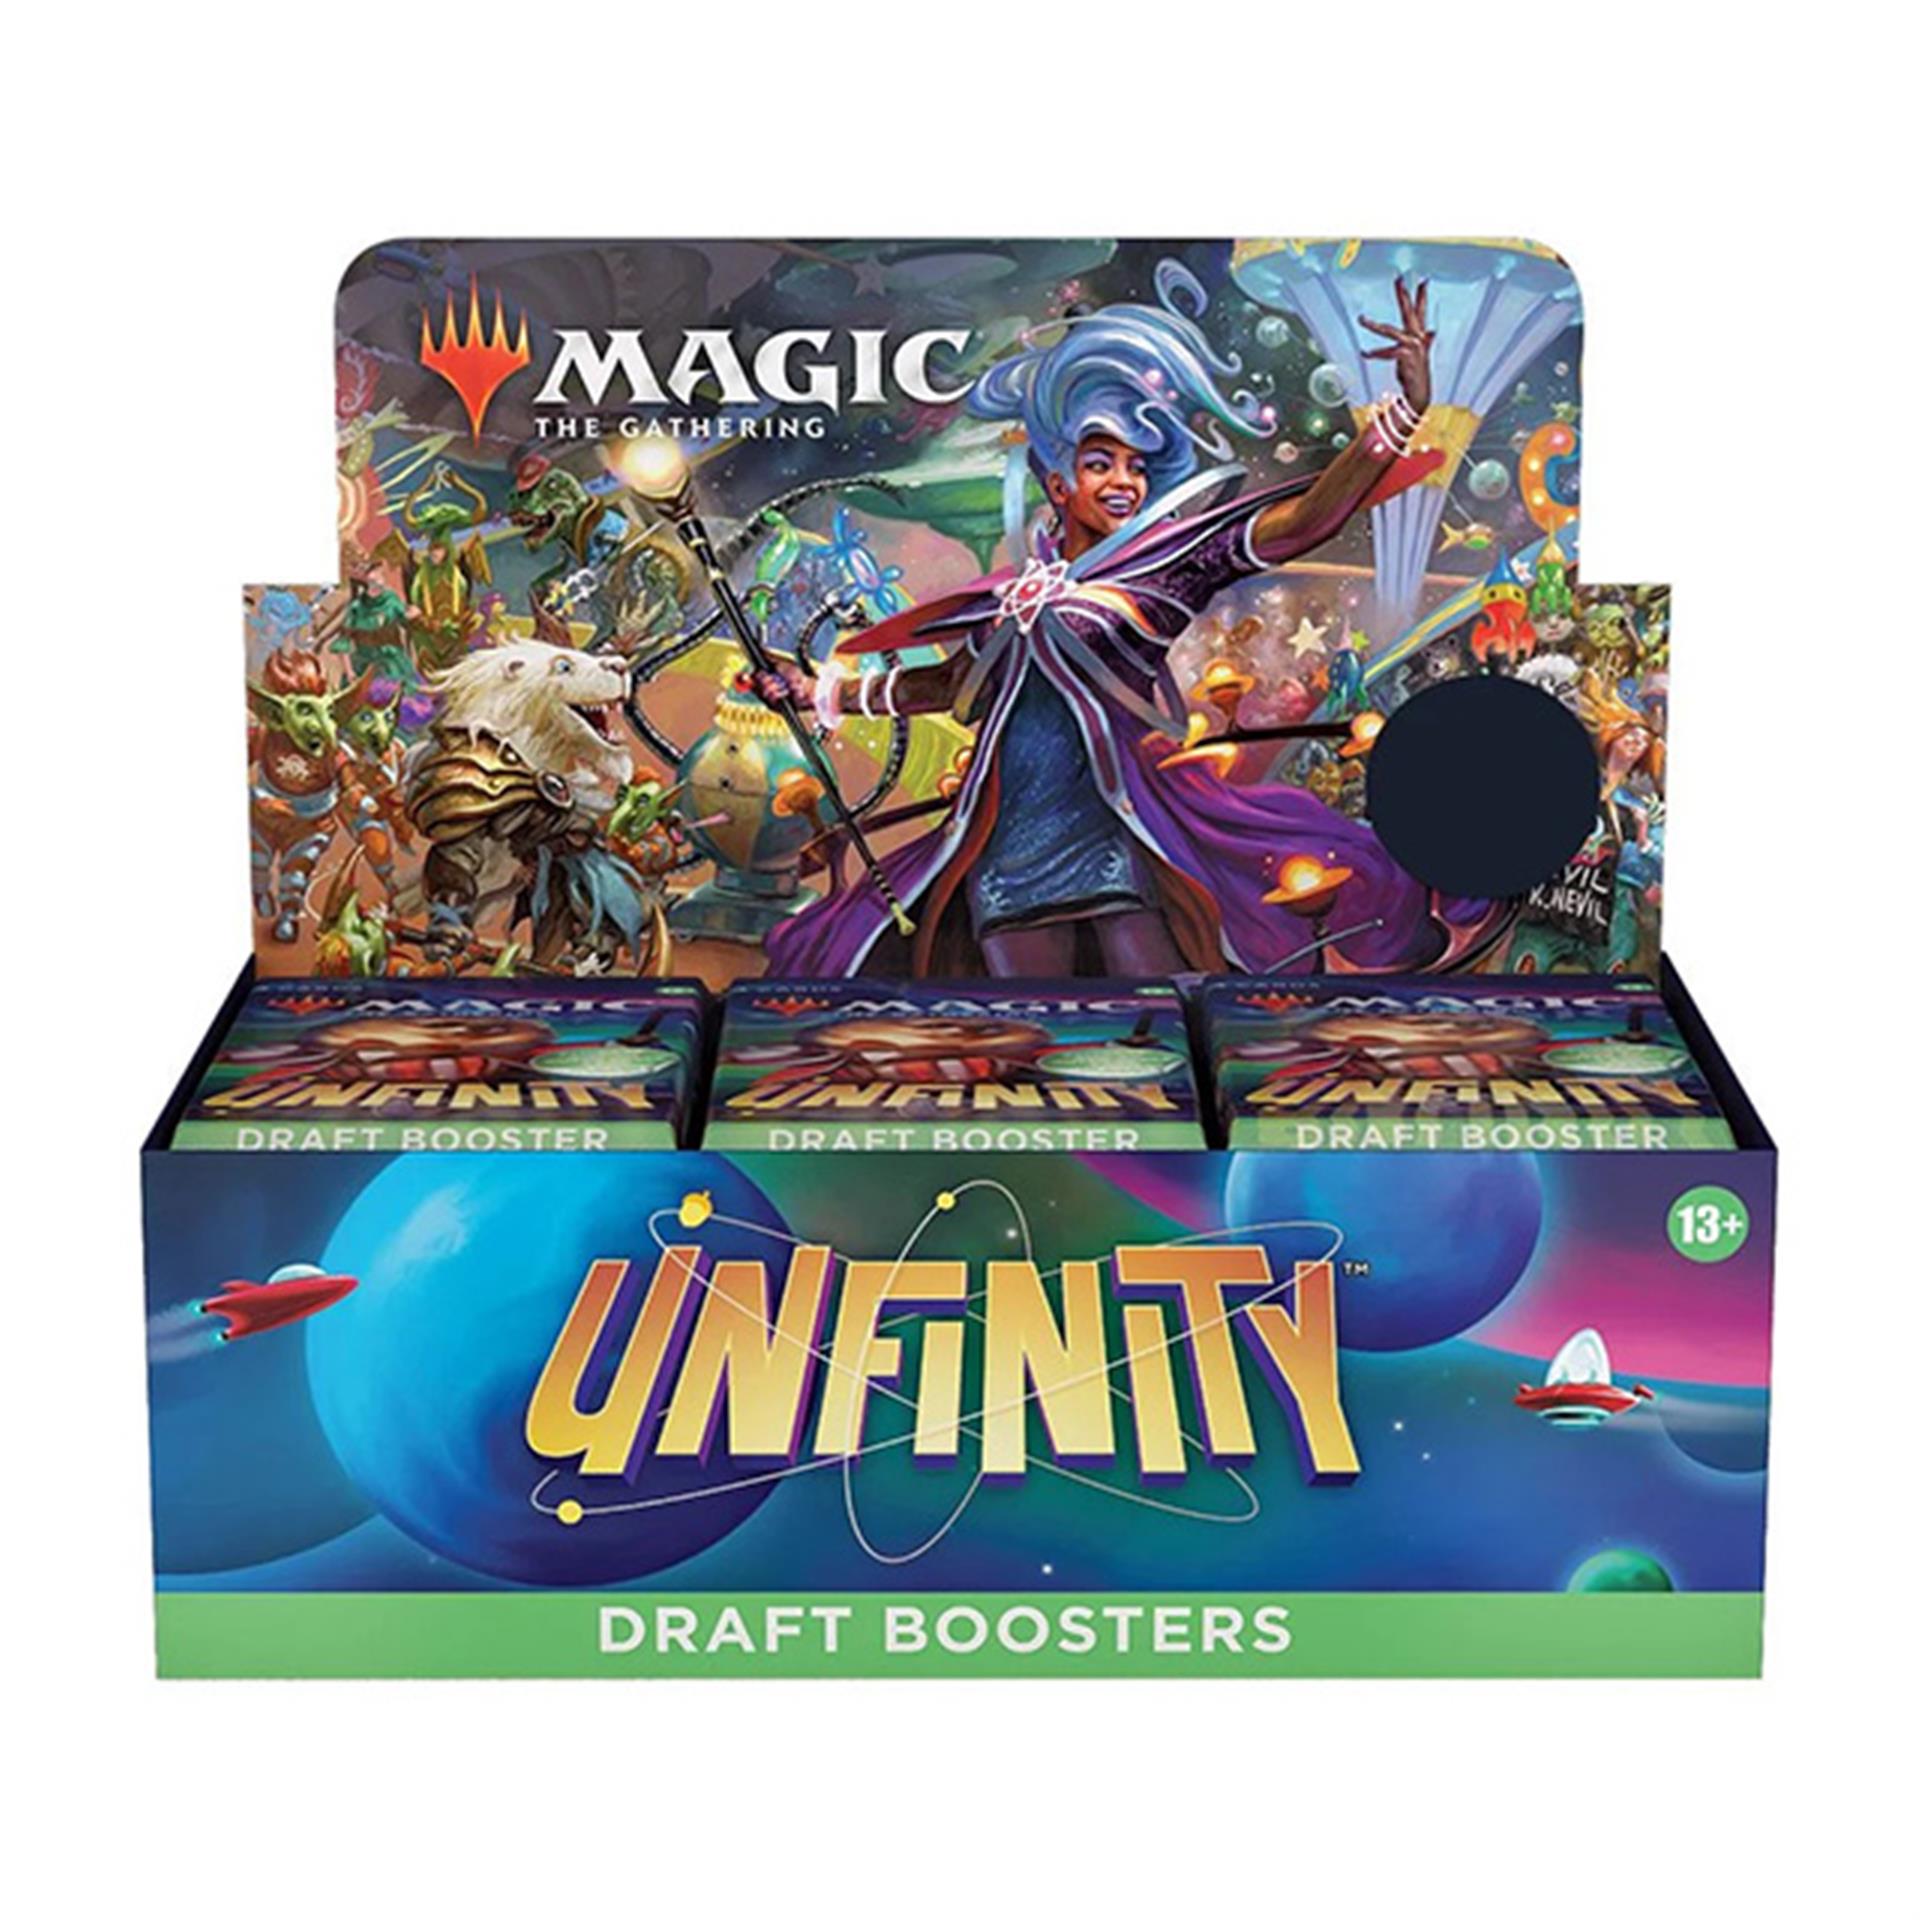 Magic: The Gathering – Unfinity: Draft Booster Display